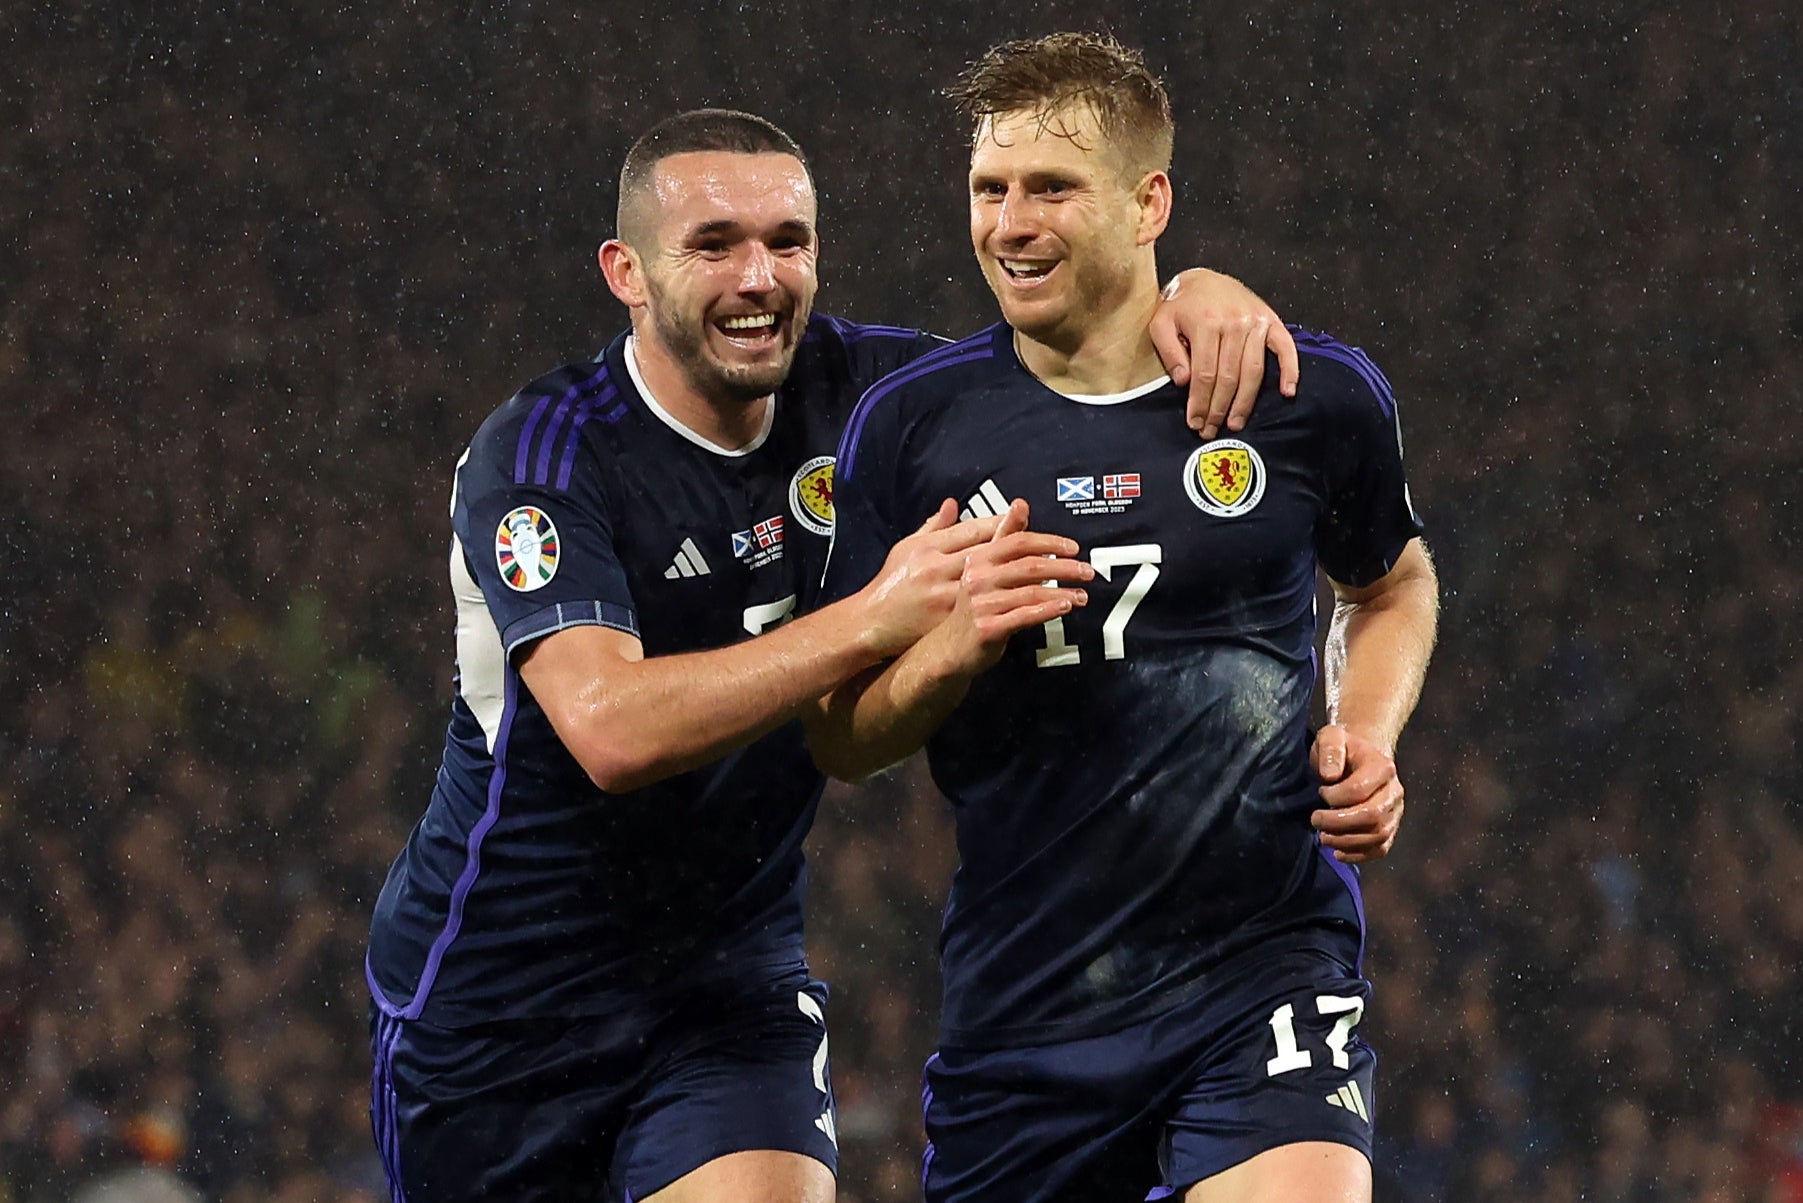 Scotland booked their place in Germany by finishing second in Group A